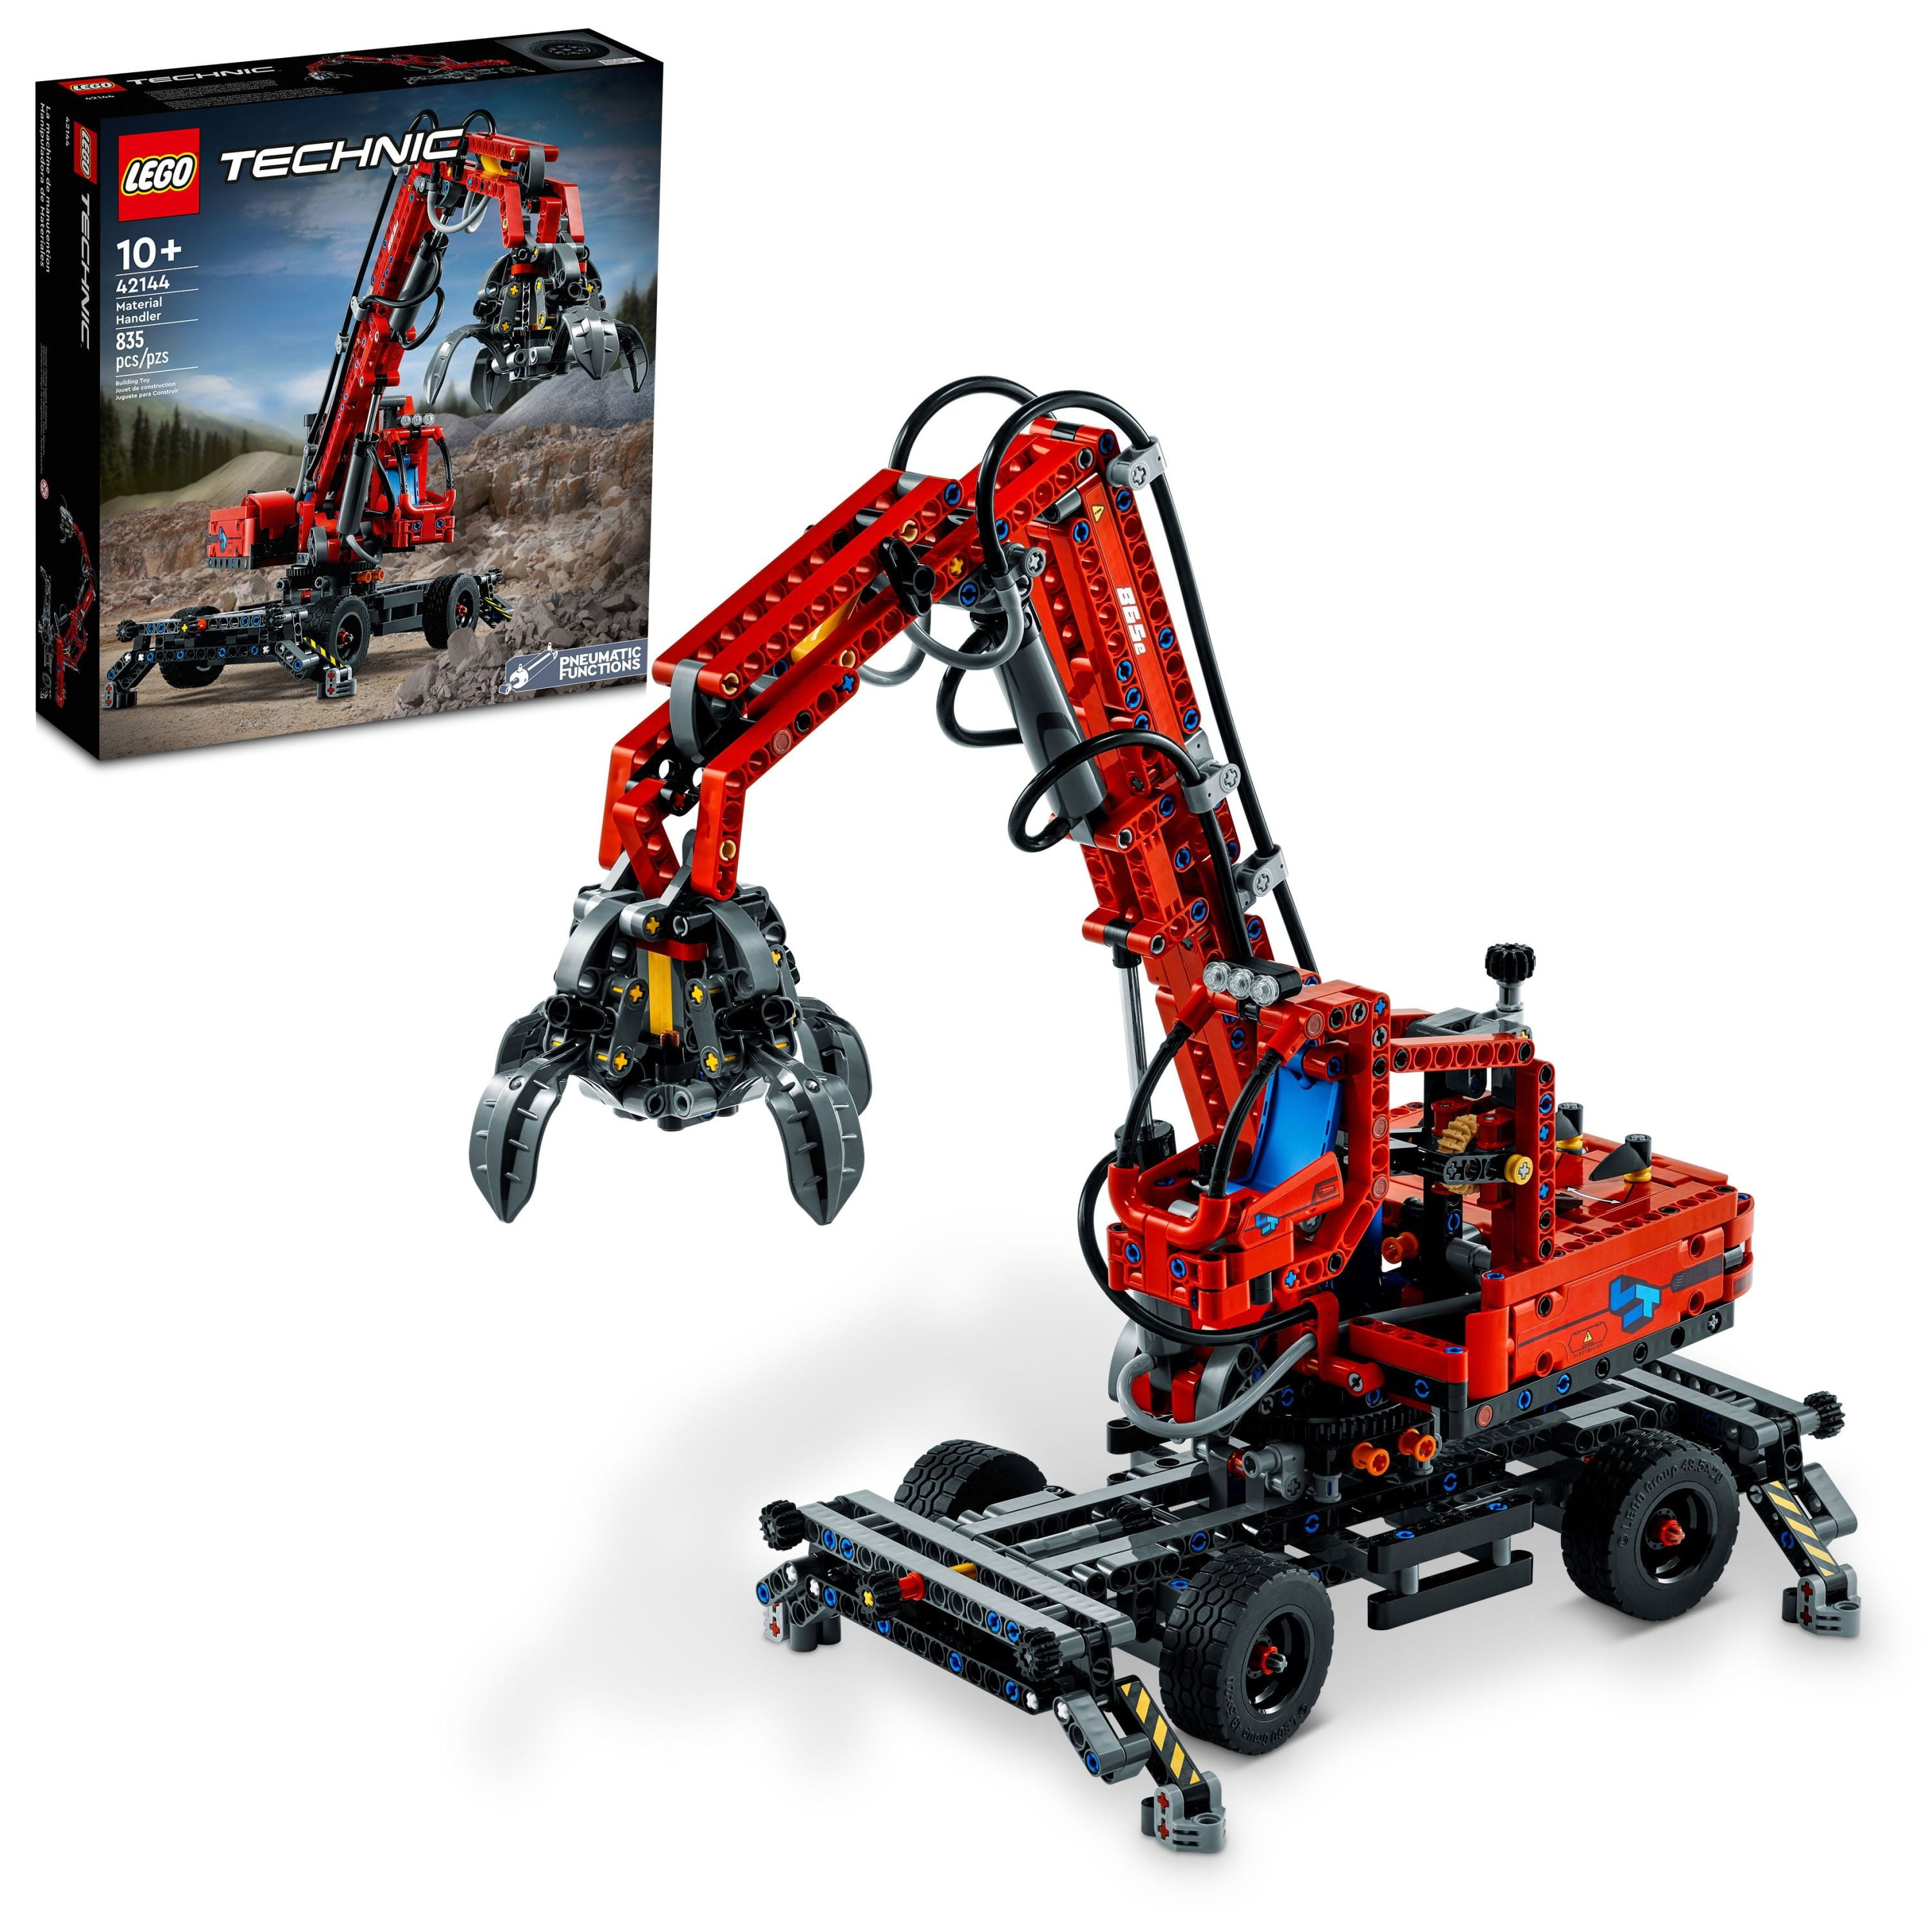 Atticus snack gået i stykker LEGO Technic Material Handler 42144, Mechanical Model Crane Toy, with  Manual and Pneumatic Functions, Construction Truck Building Set,  Educational Toys - Walmart.com